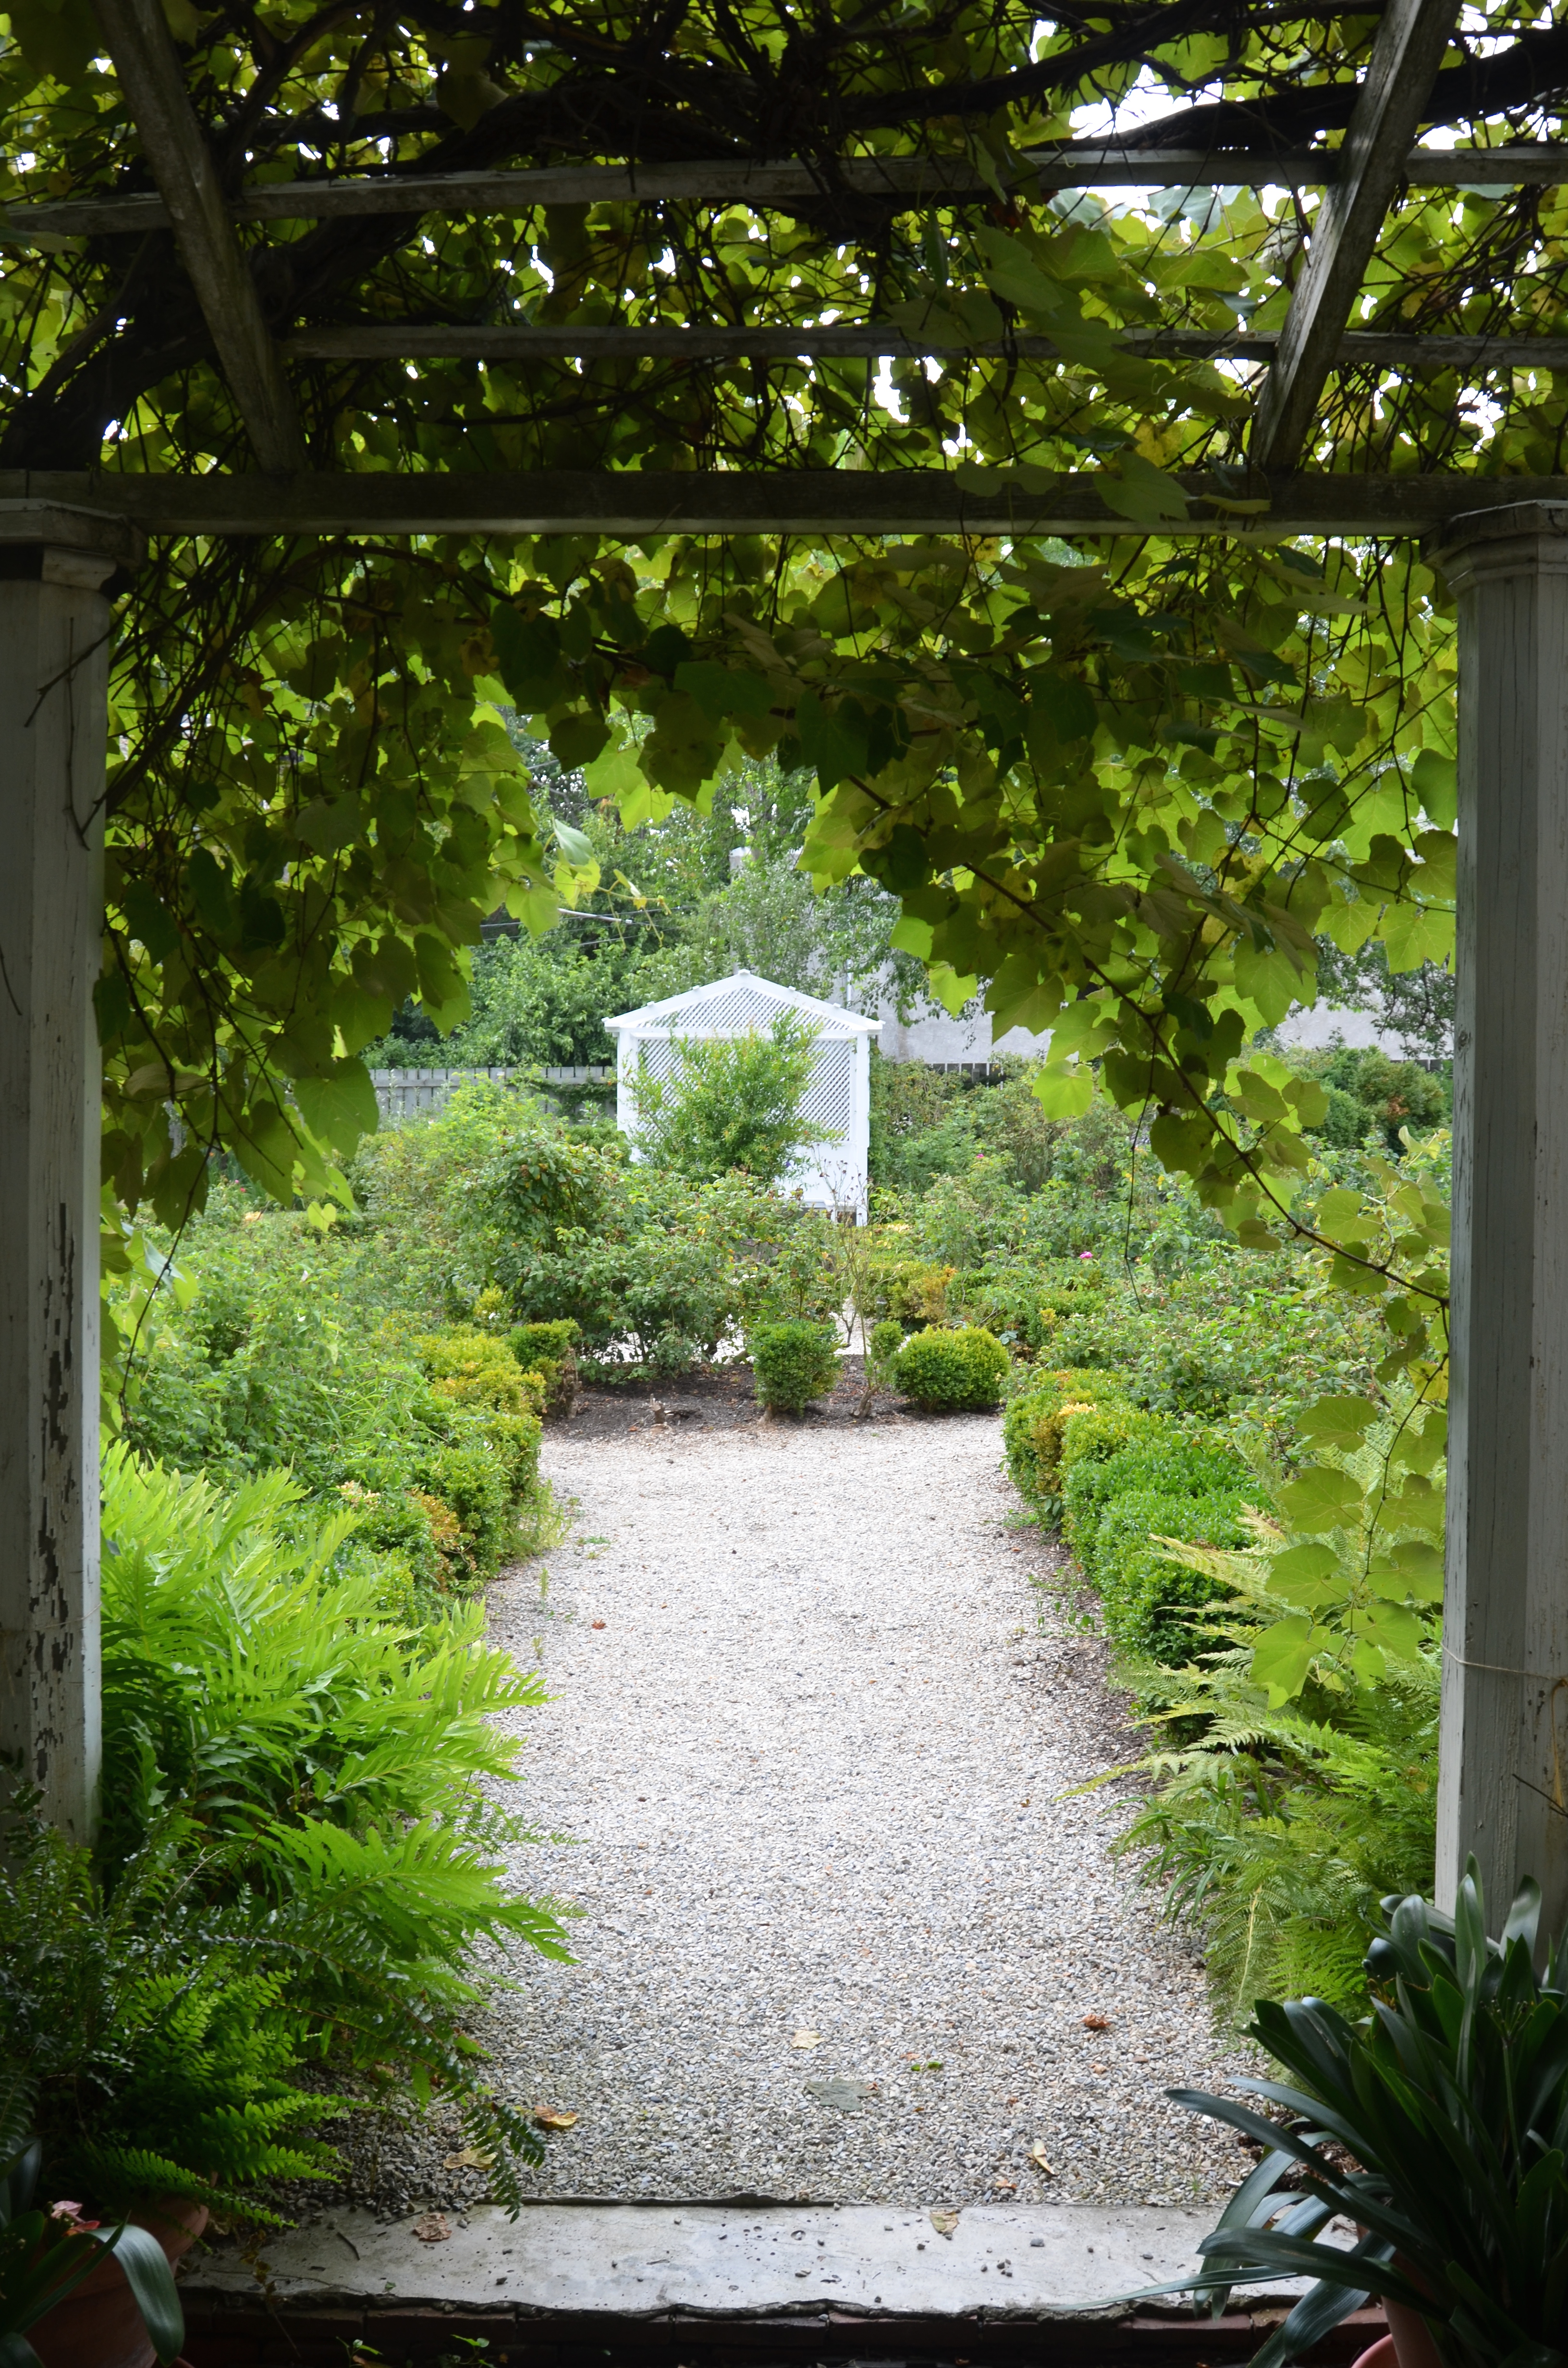 The view from "The Garden Door" at Wyck. Looking towards the box edged rose garden and to the simple white arbor containing a shady sitting place.